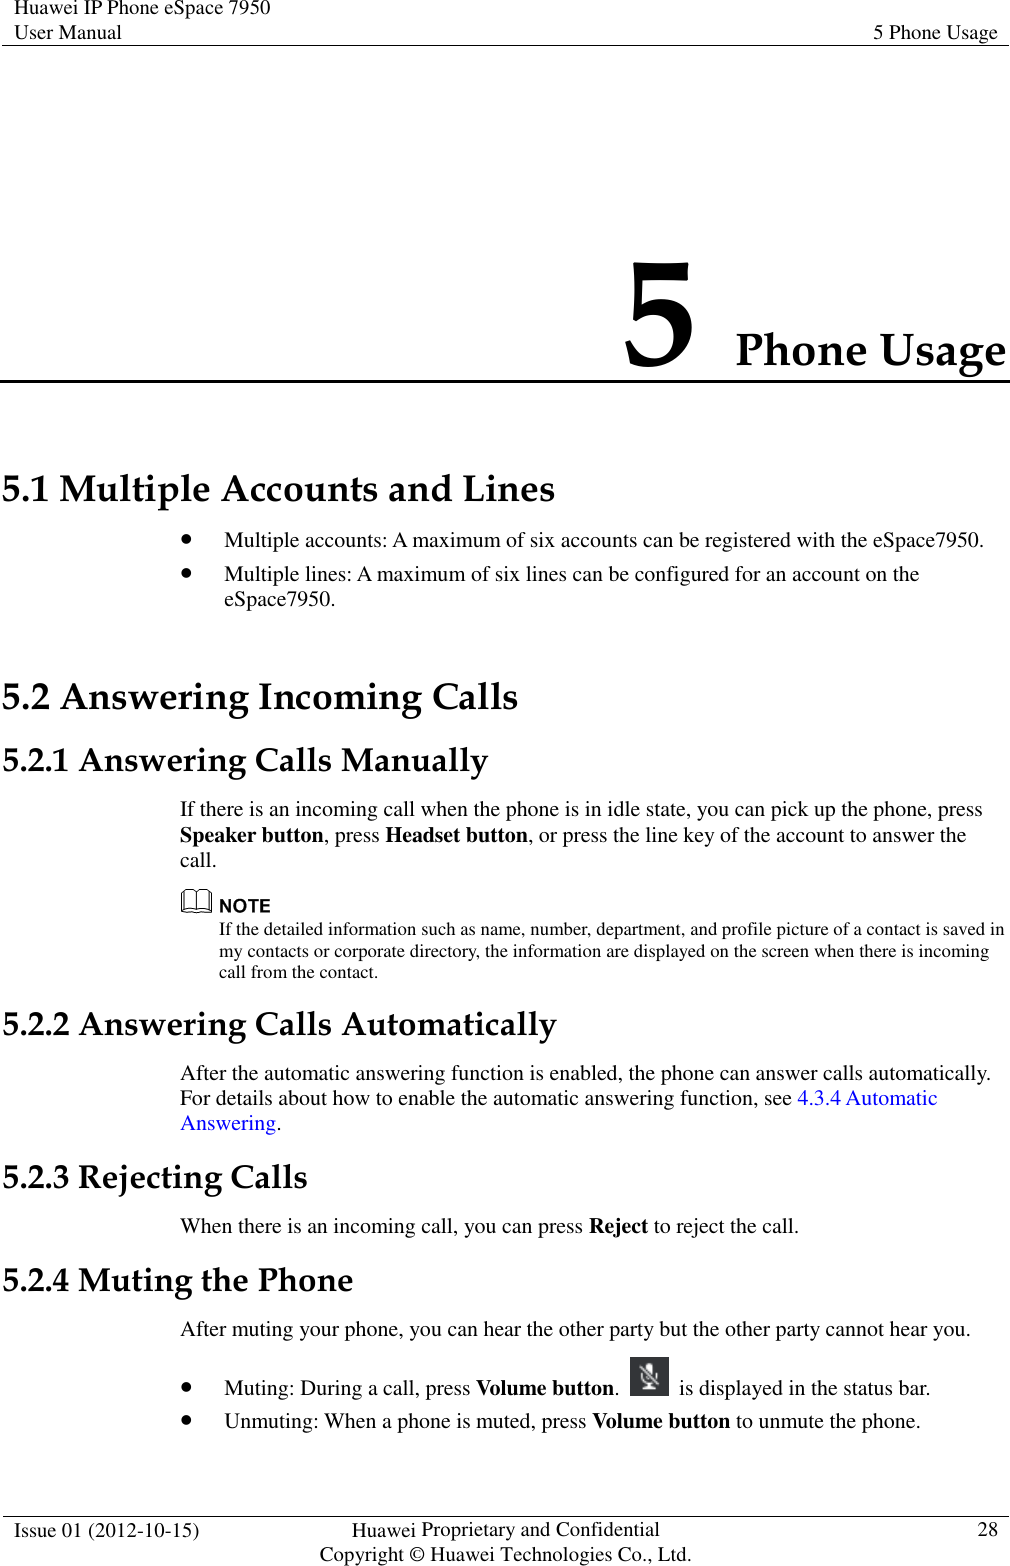 Huawei IP Phone eSpace 7950 User Manual  5 Phone Usage  Issue 01 (2012-10-15)  Huawei Proprietary and Confidential                                     Copyright © Huawei Technologies Co., Ltd.  28  5 Phone Usage 5.1 Multiple Accounts and Lines  Multiple accounts: A maximum of six accounts can be registered with the eSpace7950.  Multiple lines: A maximum of six lines can be configured for an account on the eSpace7950. 5.2 Answering Incoming Calls 5.2.1 Answering Calls Manually If there is an incoming call when the phone is in idle state, you can pick up the phone, press Speaker button, press Headset button, or press the line key of the account to answer the call.  If the detailed information such as name, number, department, and profile picture of a contact is saved in my contacts or corporate directory, the information are displayed on the screen when there is incoming call from the contact. 5.2.2 Answering Calls Automatically After the automatic answering function is enabled, the phone can answer calls automatically. For details about how to enable the automatic answering function, see 4.3.4 Automatic Answering. 5.2.3 Rejecting Calls When there is an incoming call, you can press Reject to reject the call. 5.2.4 Muting the Phone After muting your phone, you can hear the other party but the other party cannot hear you.  Muting: During a call, press Volume button.    is displayed in the status bar.  Unmuting: When a phone is muted, press Volume button to unmute the phone. 